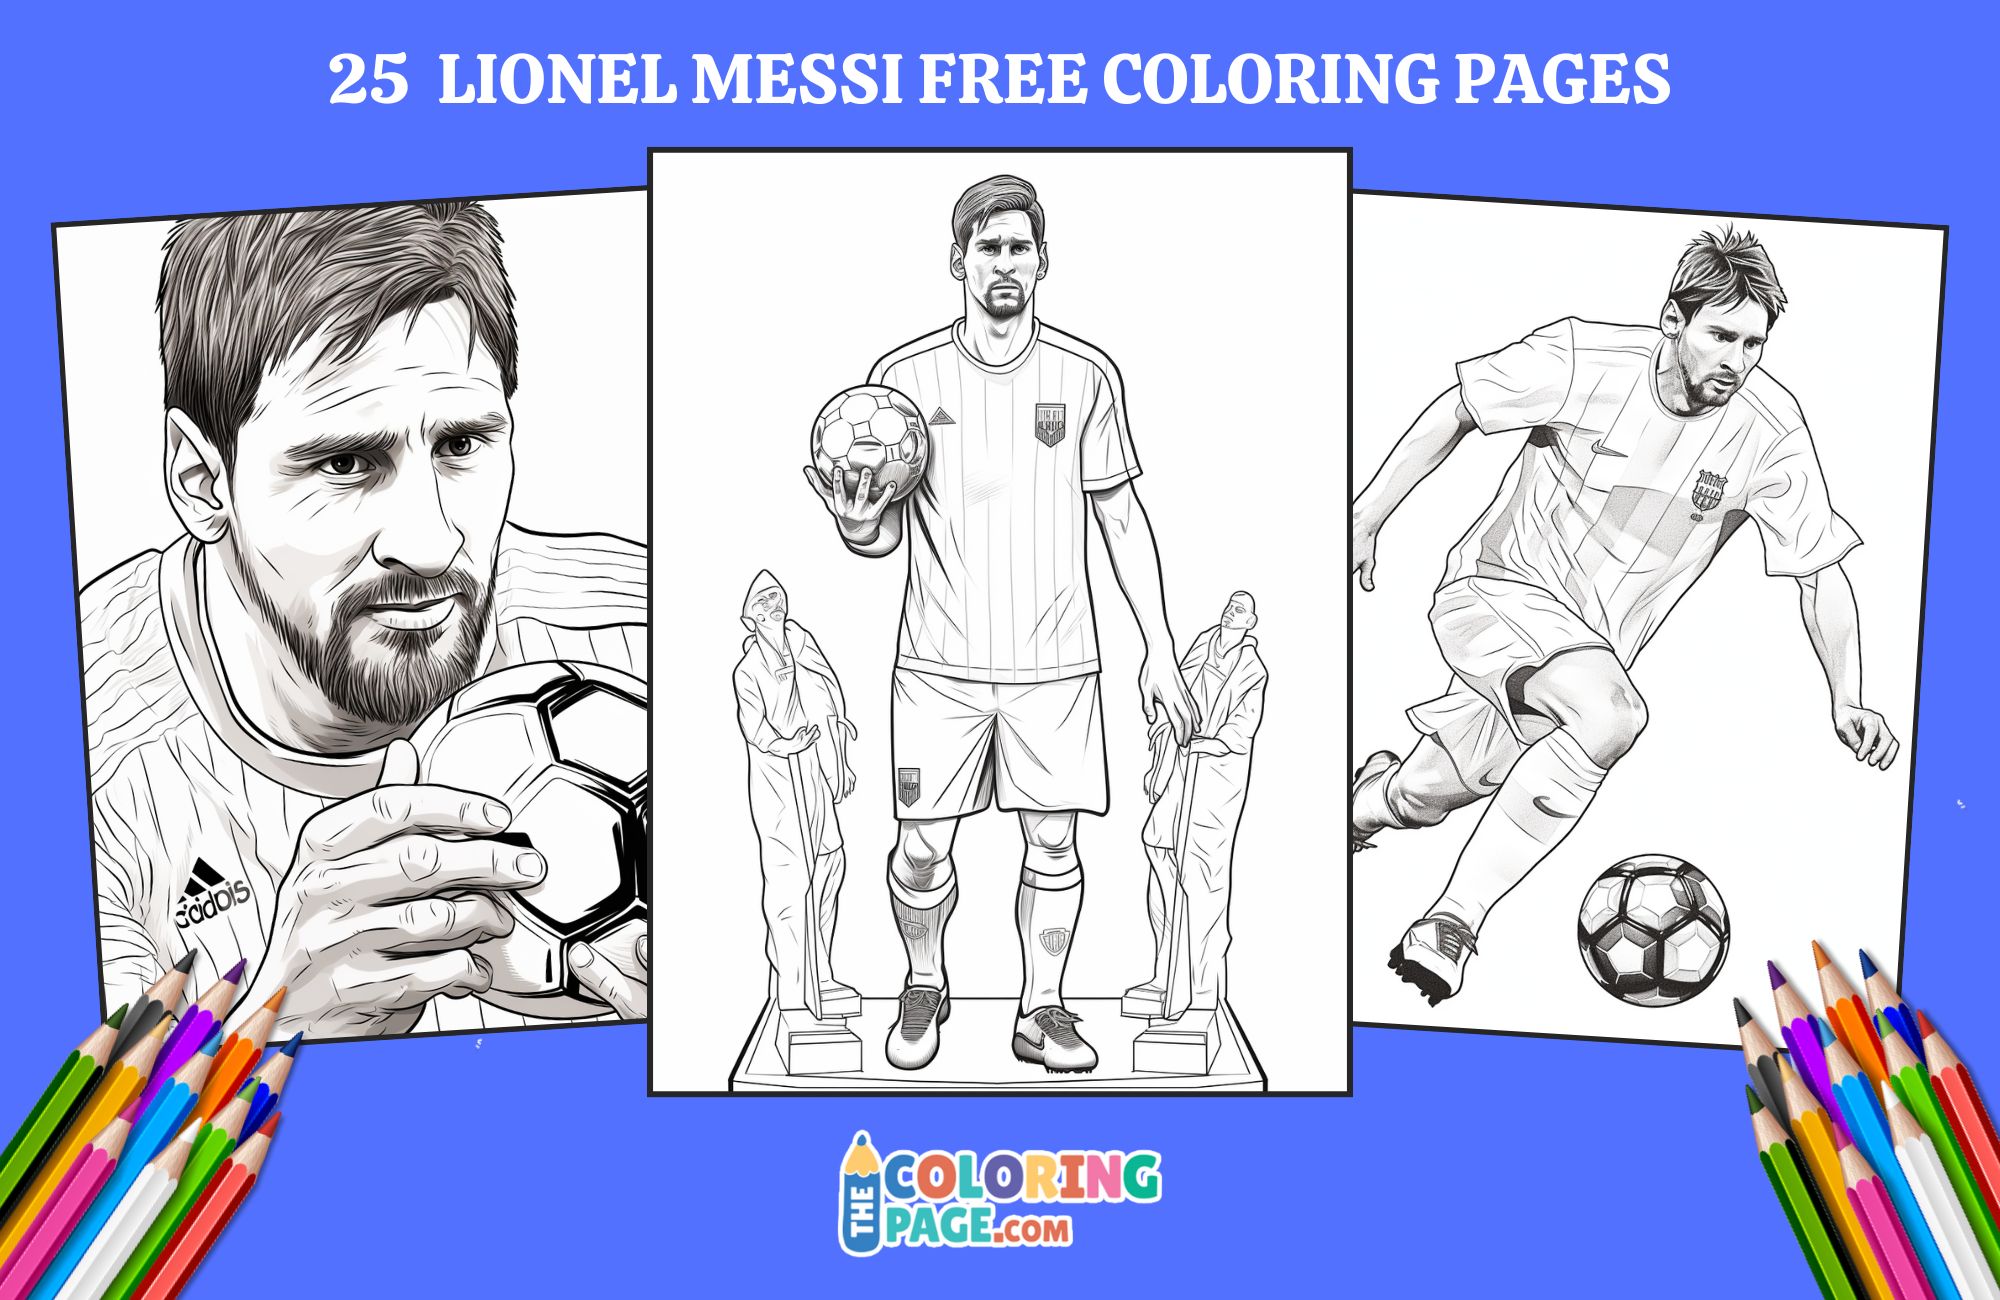 25 Lionel Messi Coloring Pages for kids